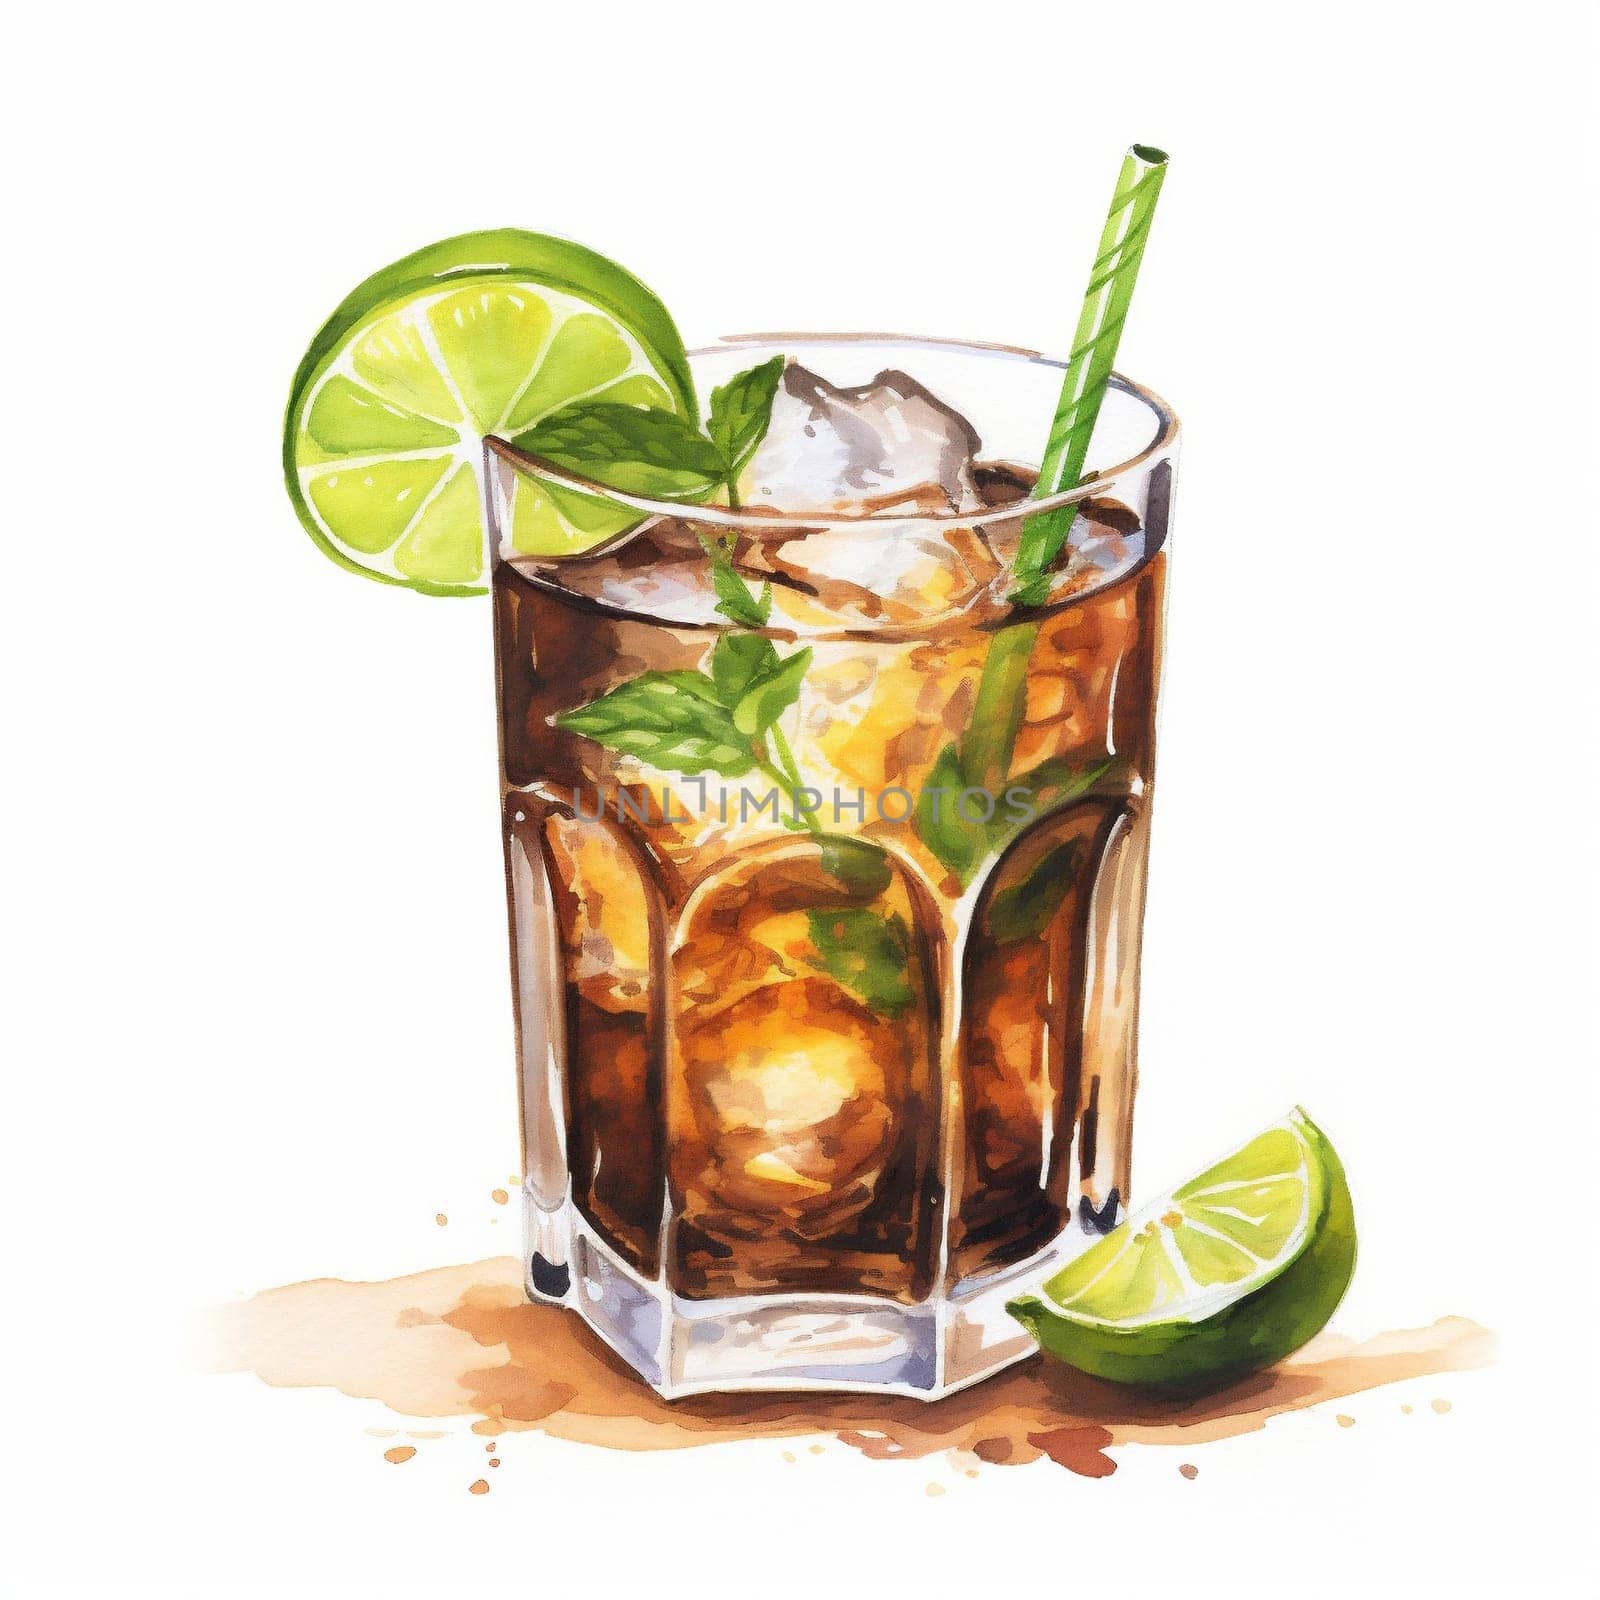 Cuba Libre Cocktail Day with Rum, Cola, Lime and Mint Leaves. by Rina_Dozornaya